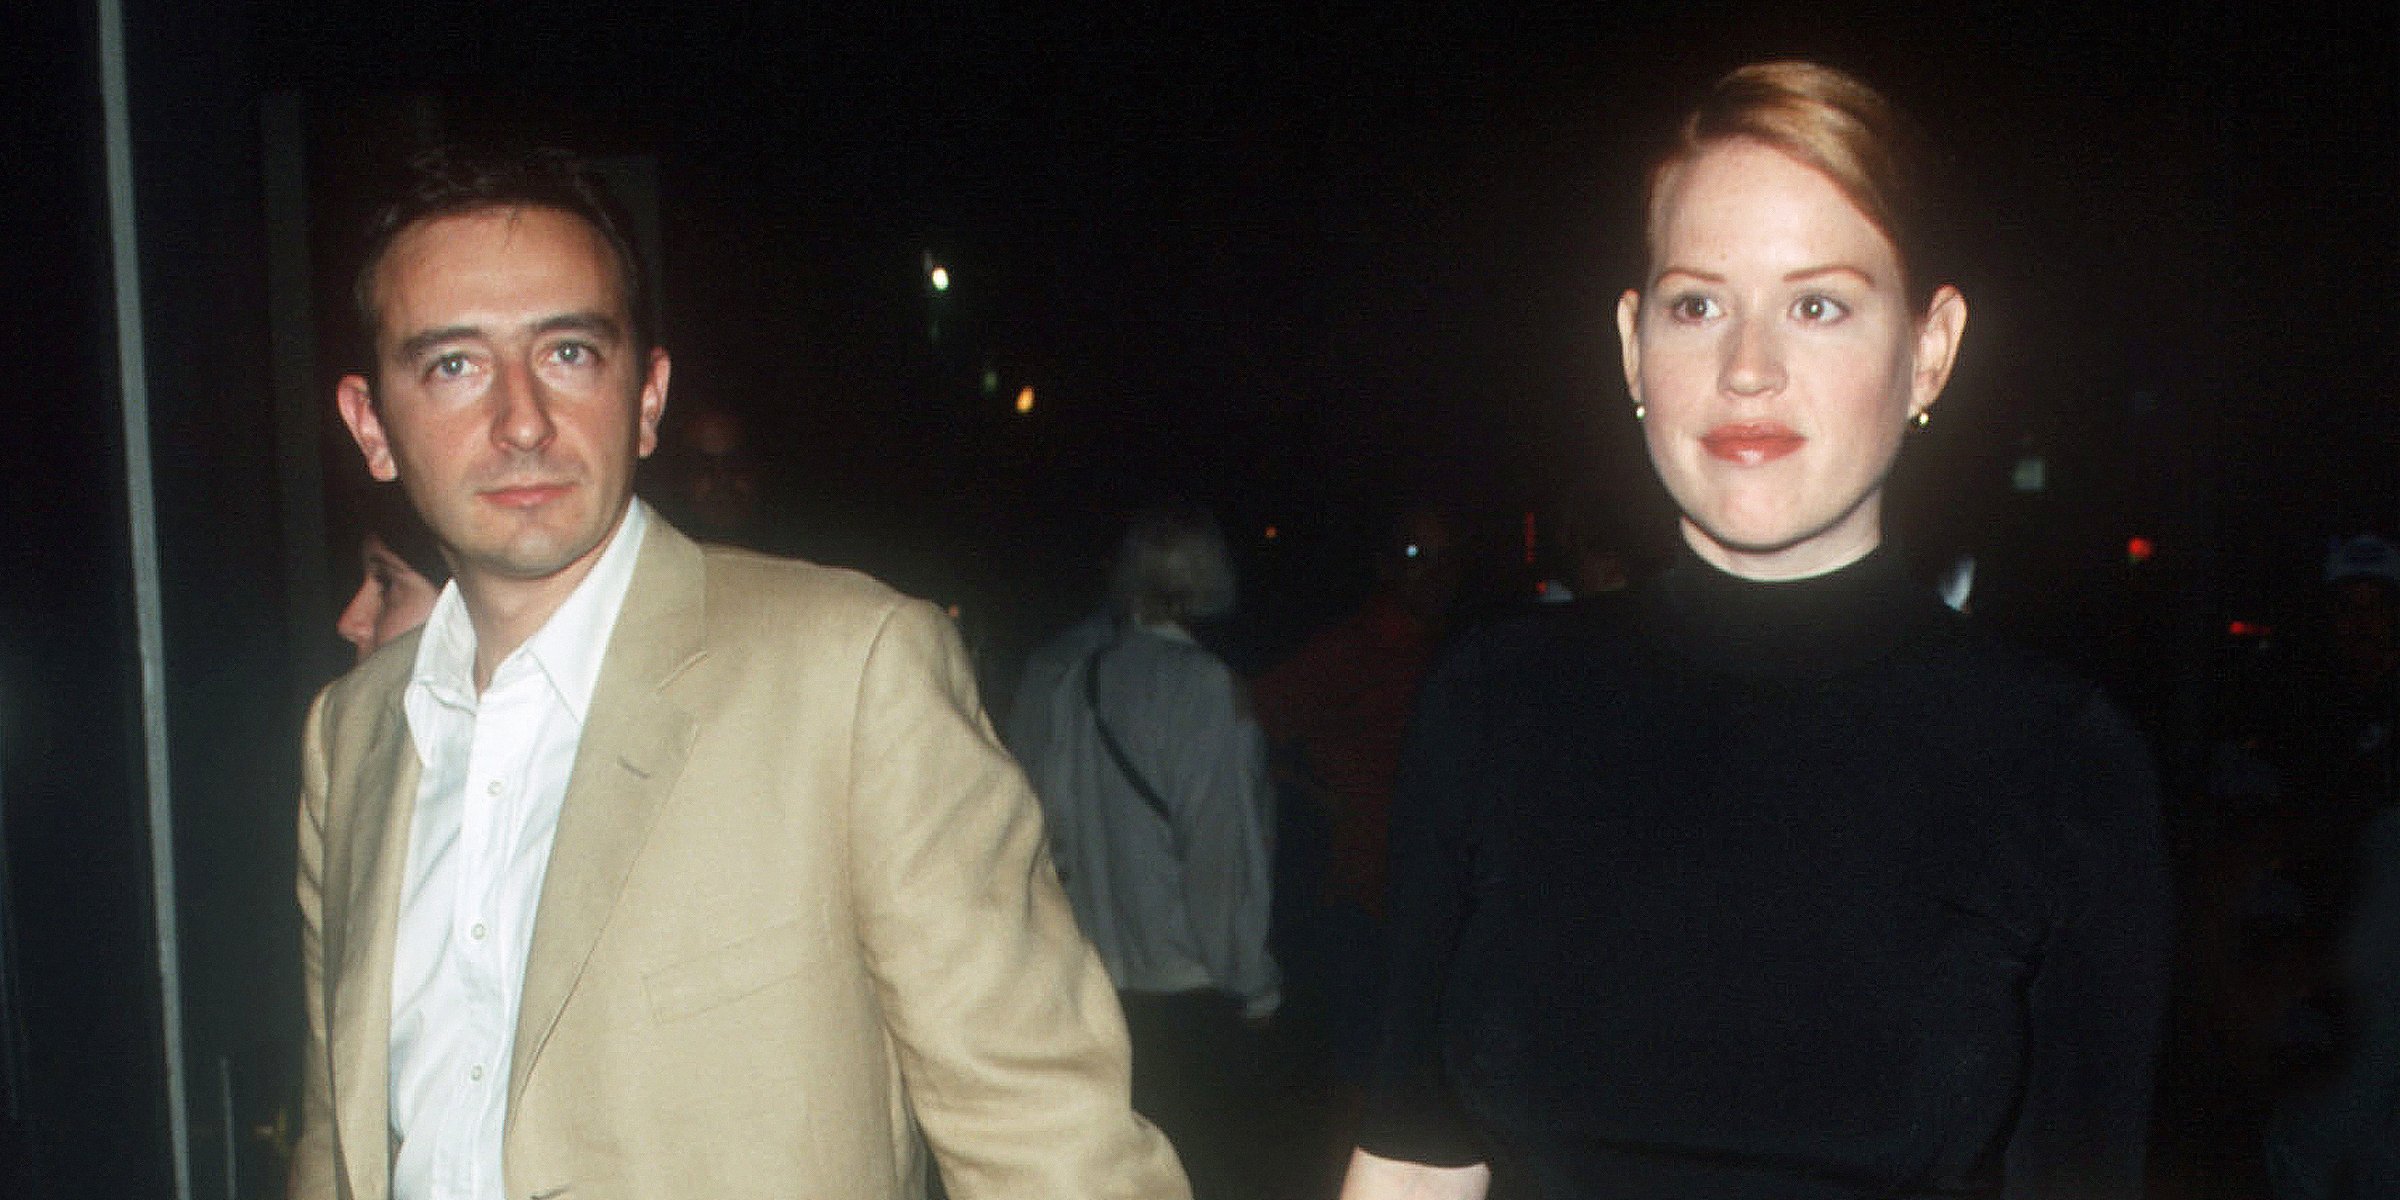 Valery Lameignère and Molly Ringwald | Source: Getty Images